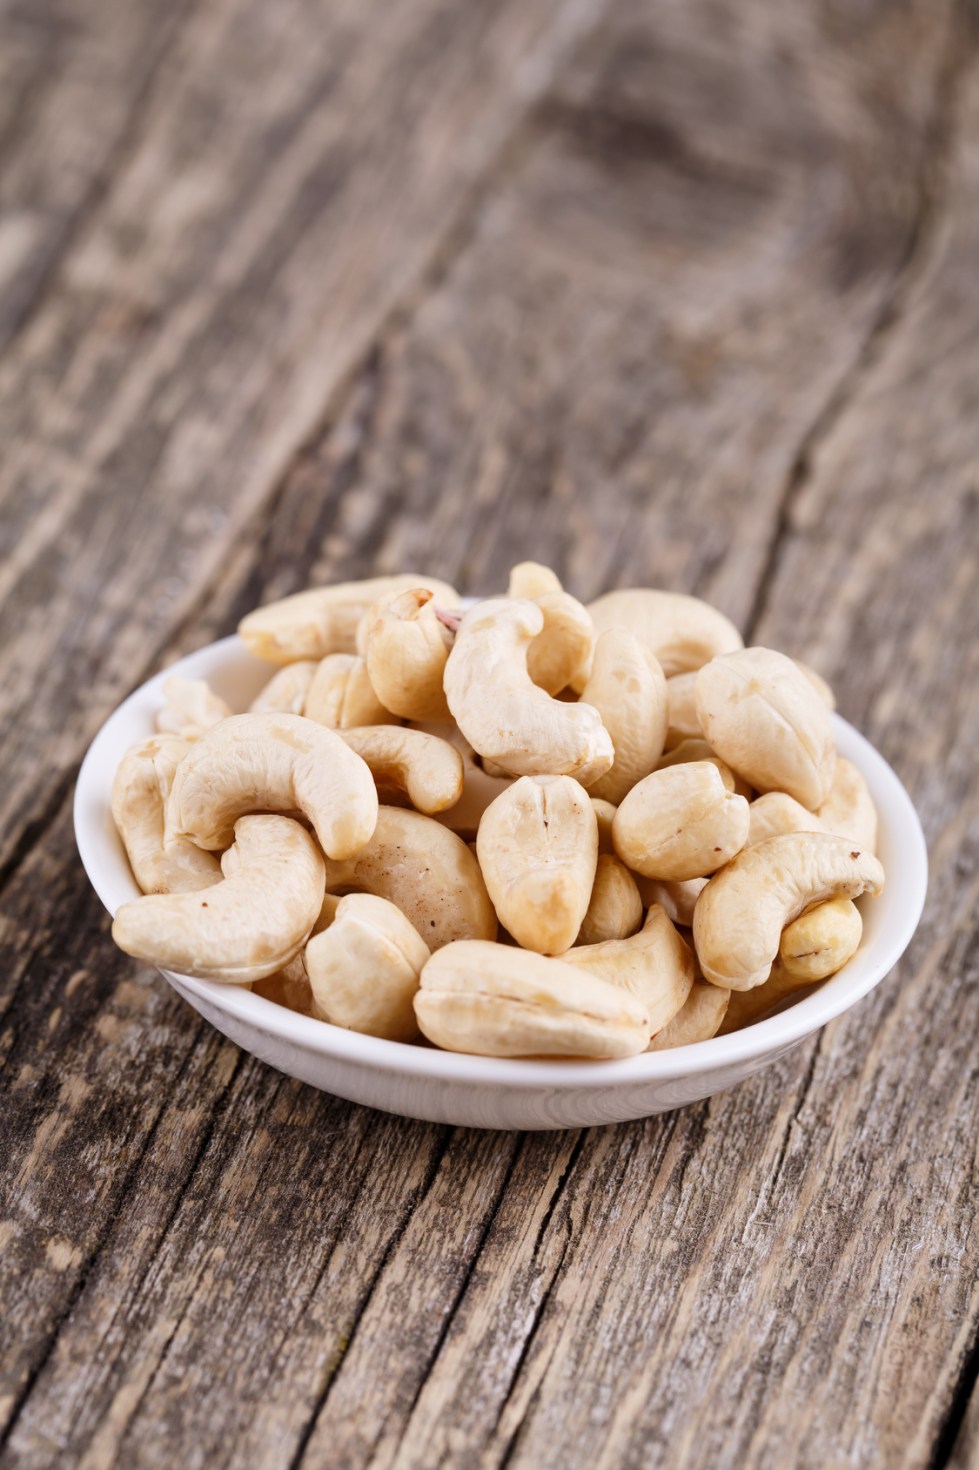 Cashew nuts on a plate on wooden background.